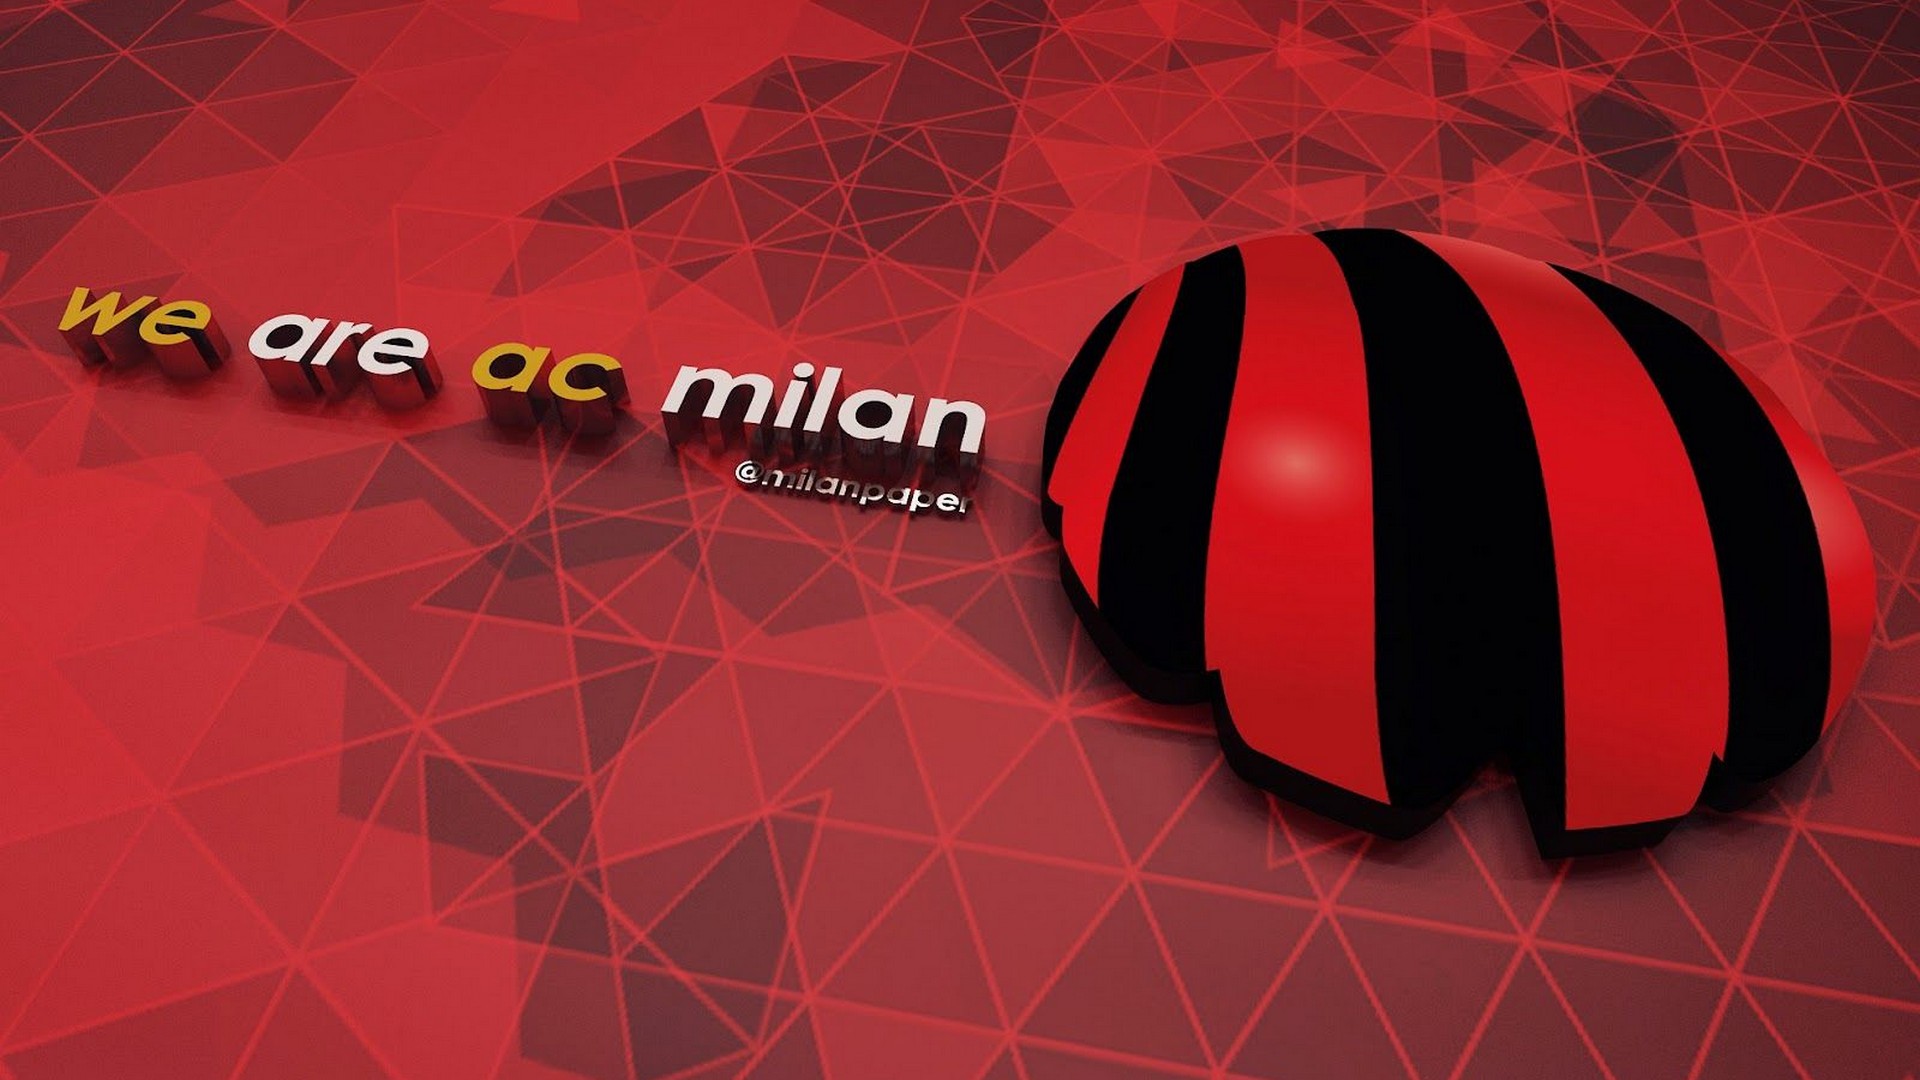 HD Desktop Wallpaper AC Milan with high-resolution 1920x1080 pixel. You can use this wallpaper for your Desktop Computers, Mac Screensavers, Windows Backgrounds, iPhone Wallpapers, Tablet or Android Lock screen and another Mobile device